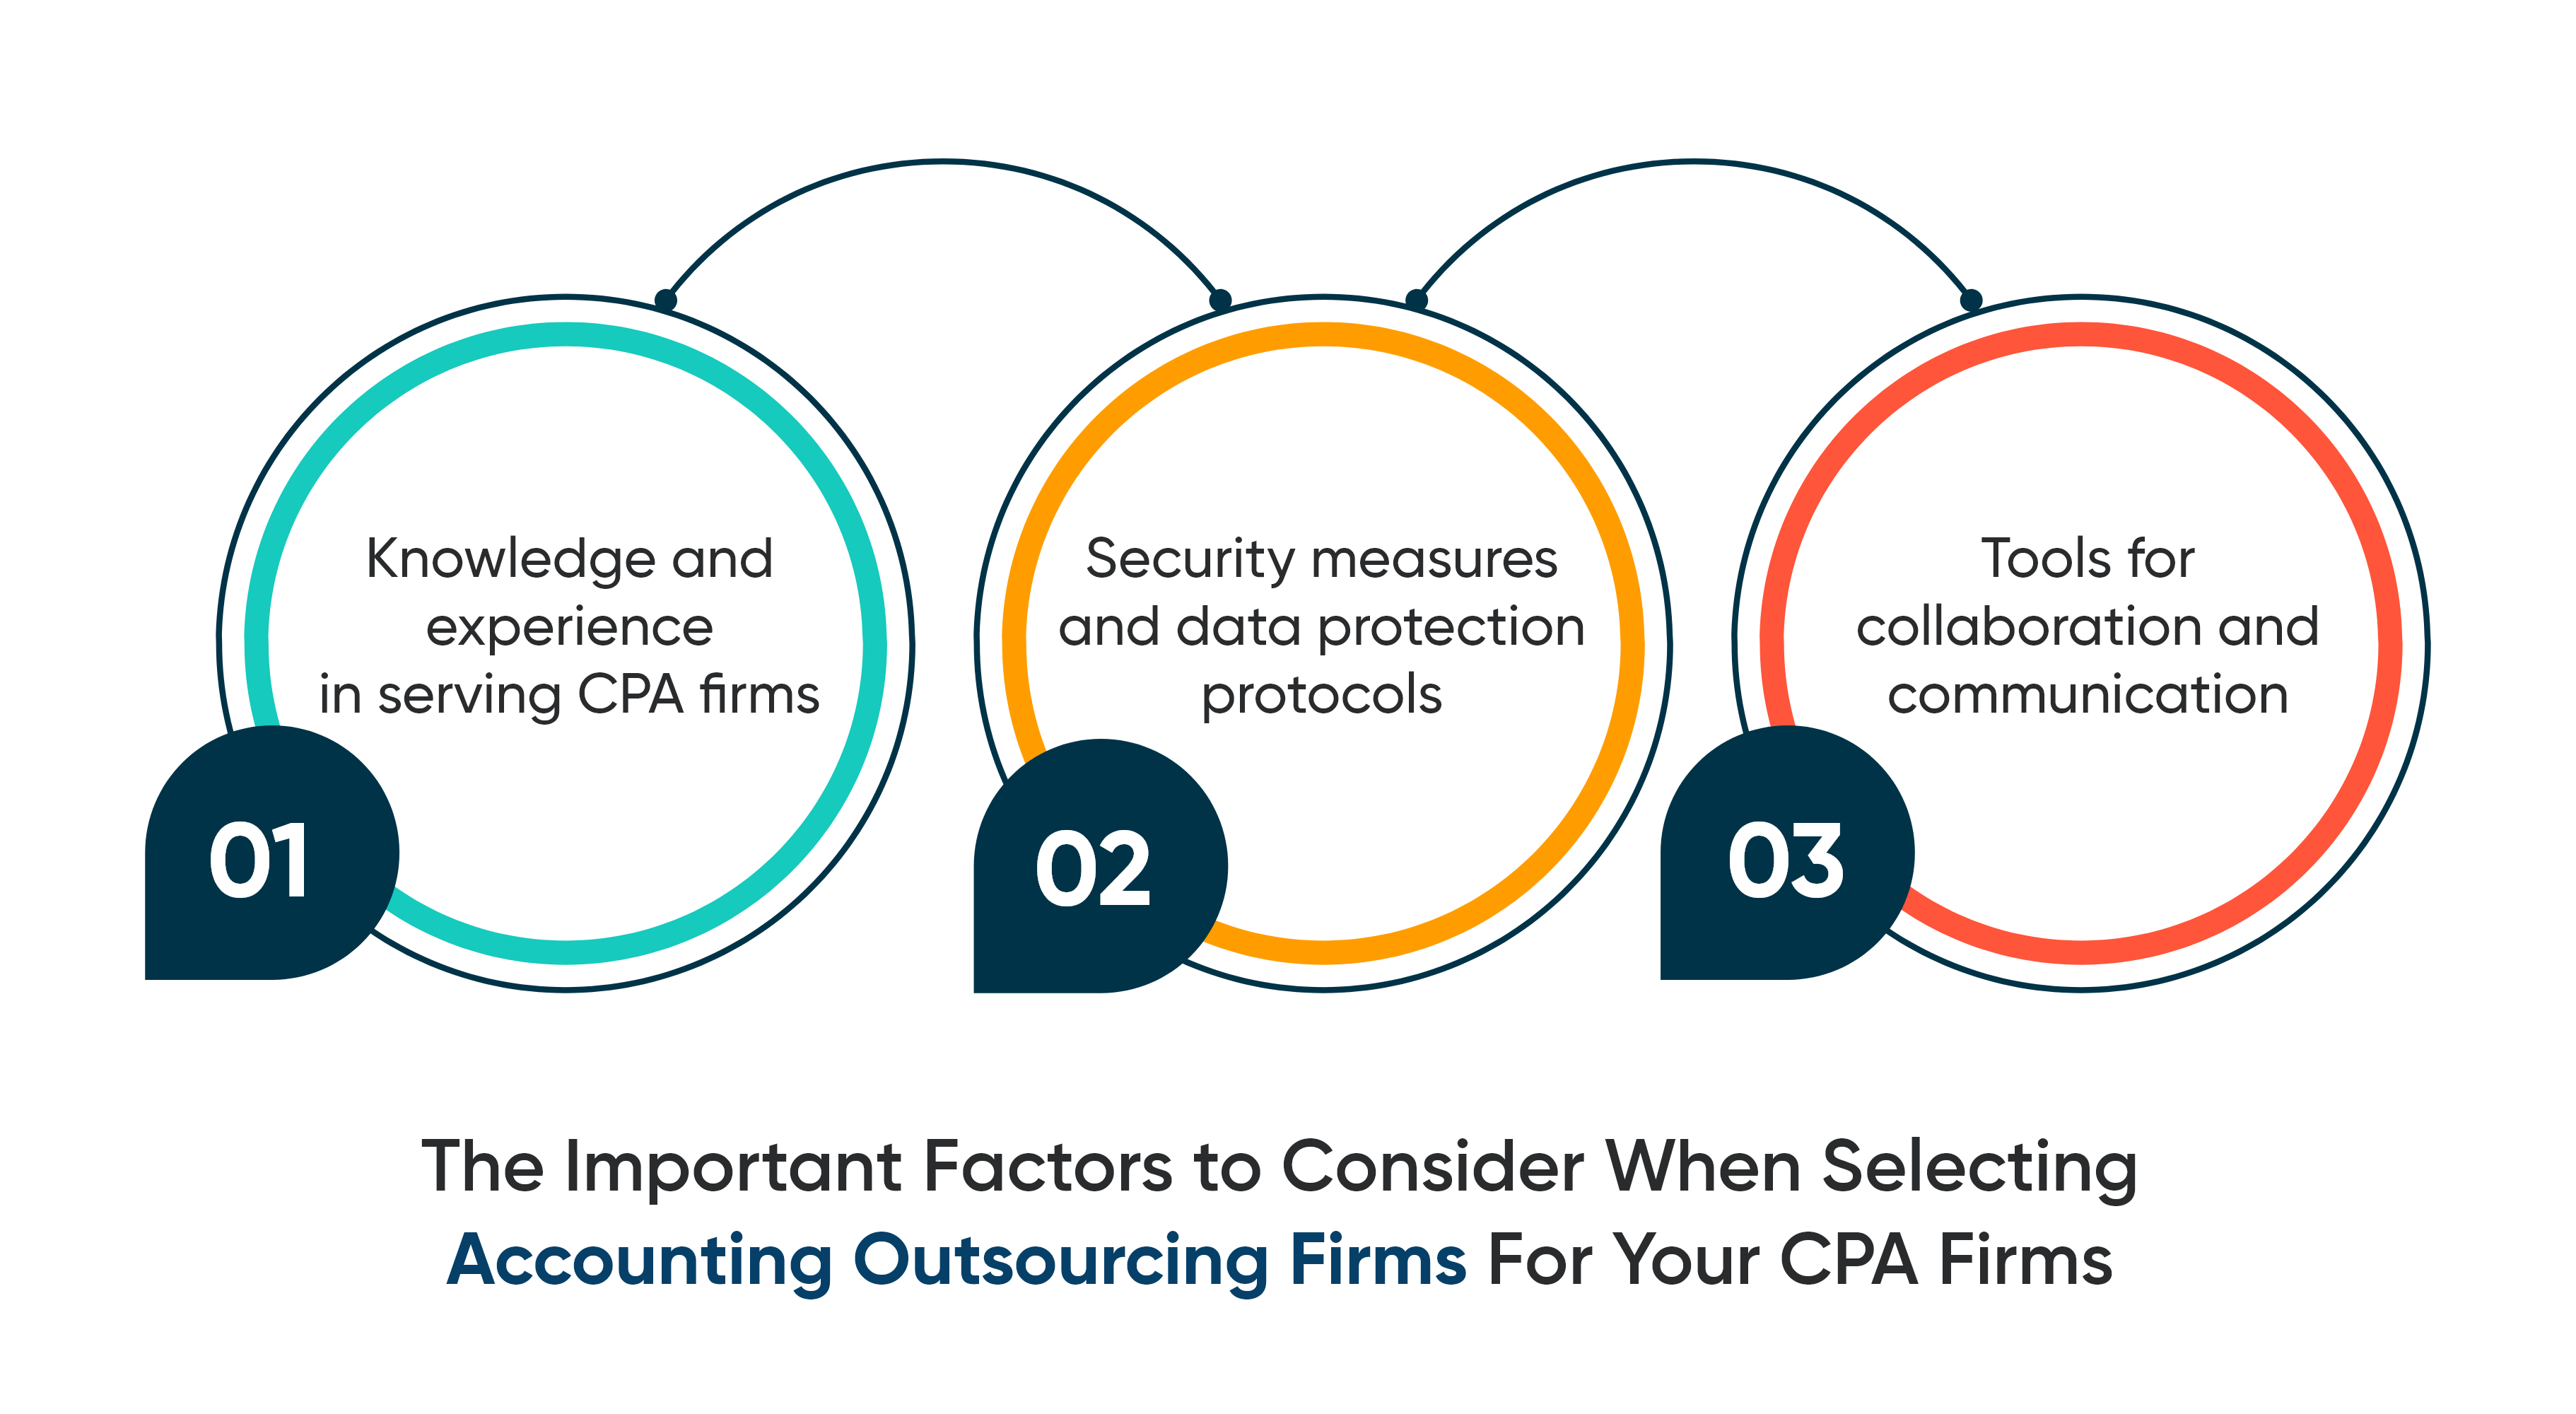 The important factors to consider when selecting accounting outsourcing firms for your CPA firms